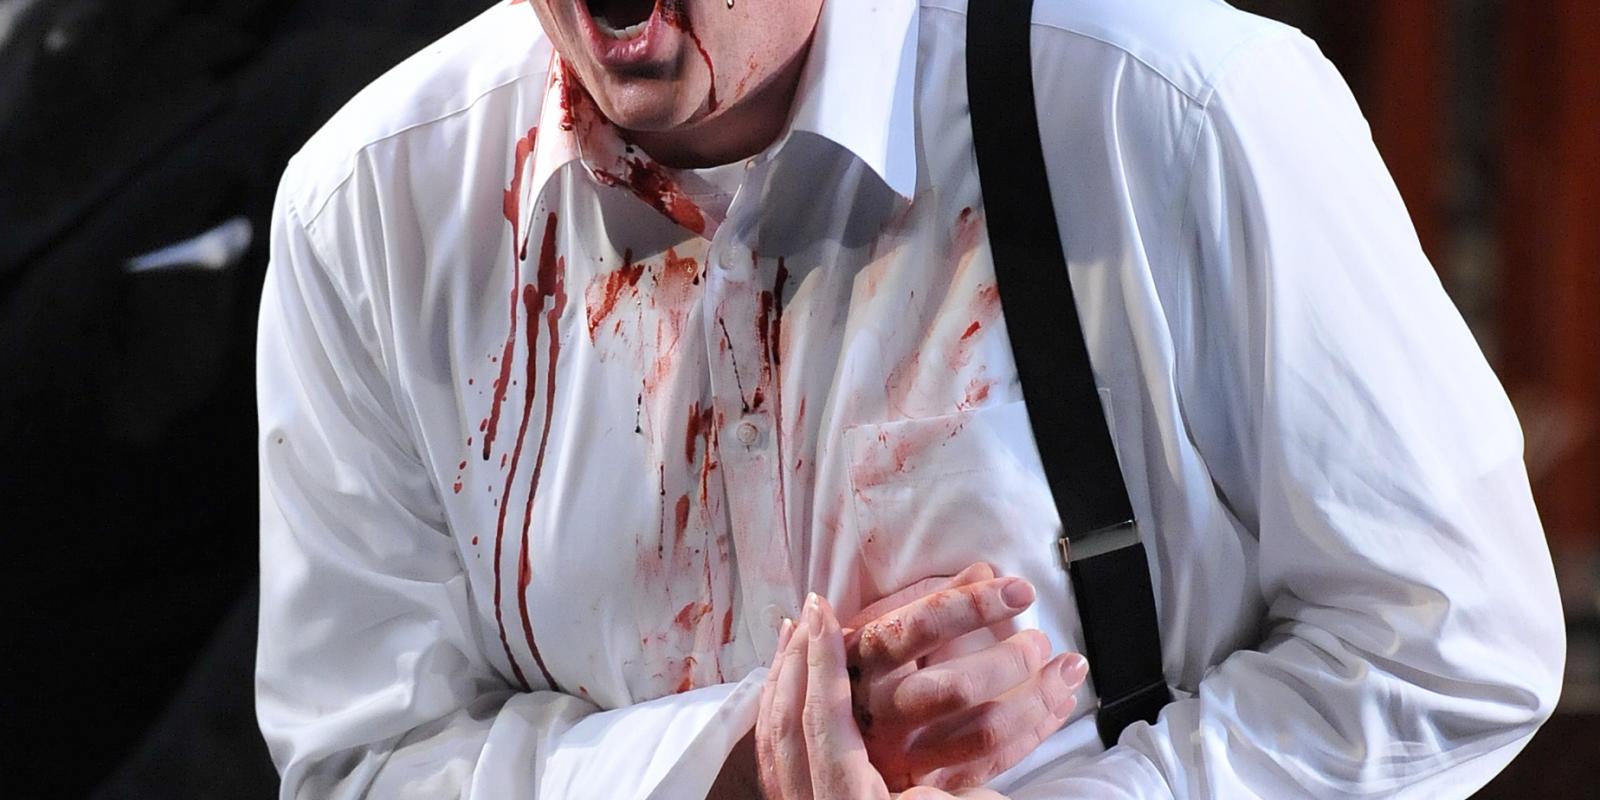 man on stage with blood on his white shirt in Rigoletto